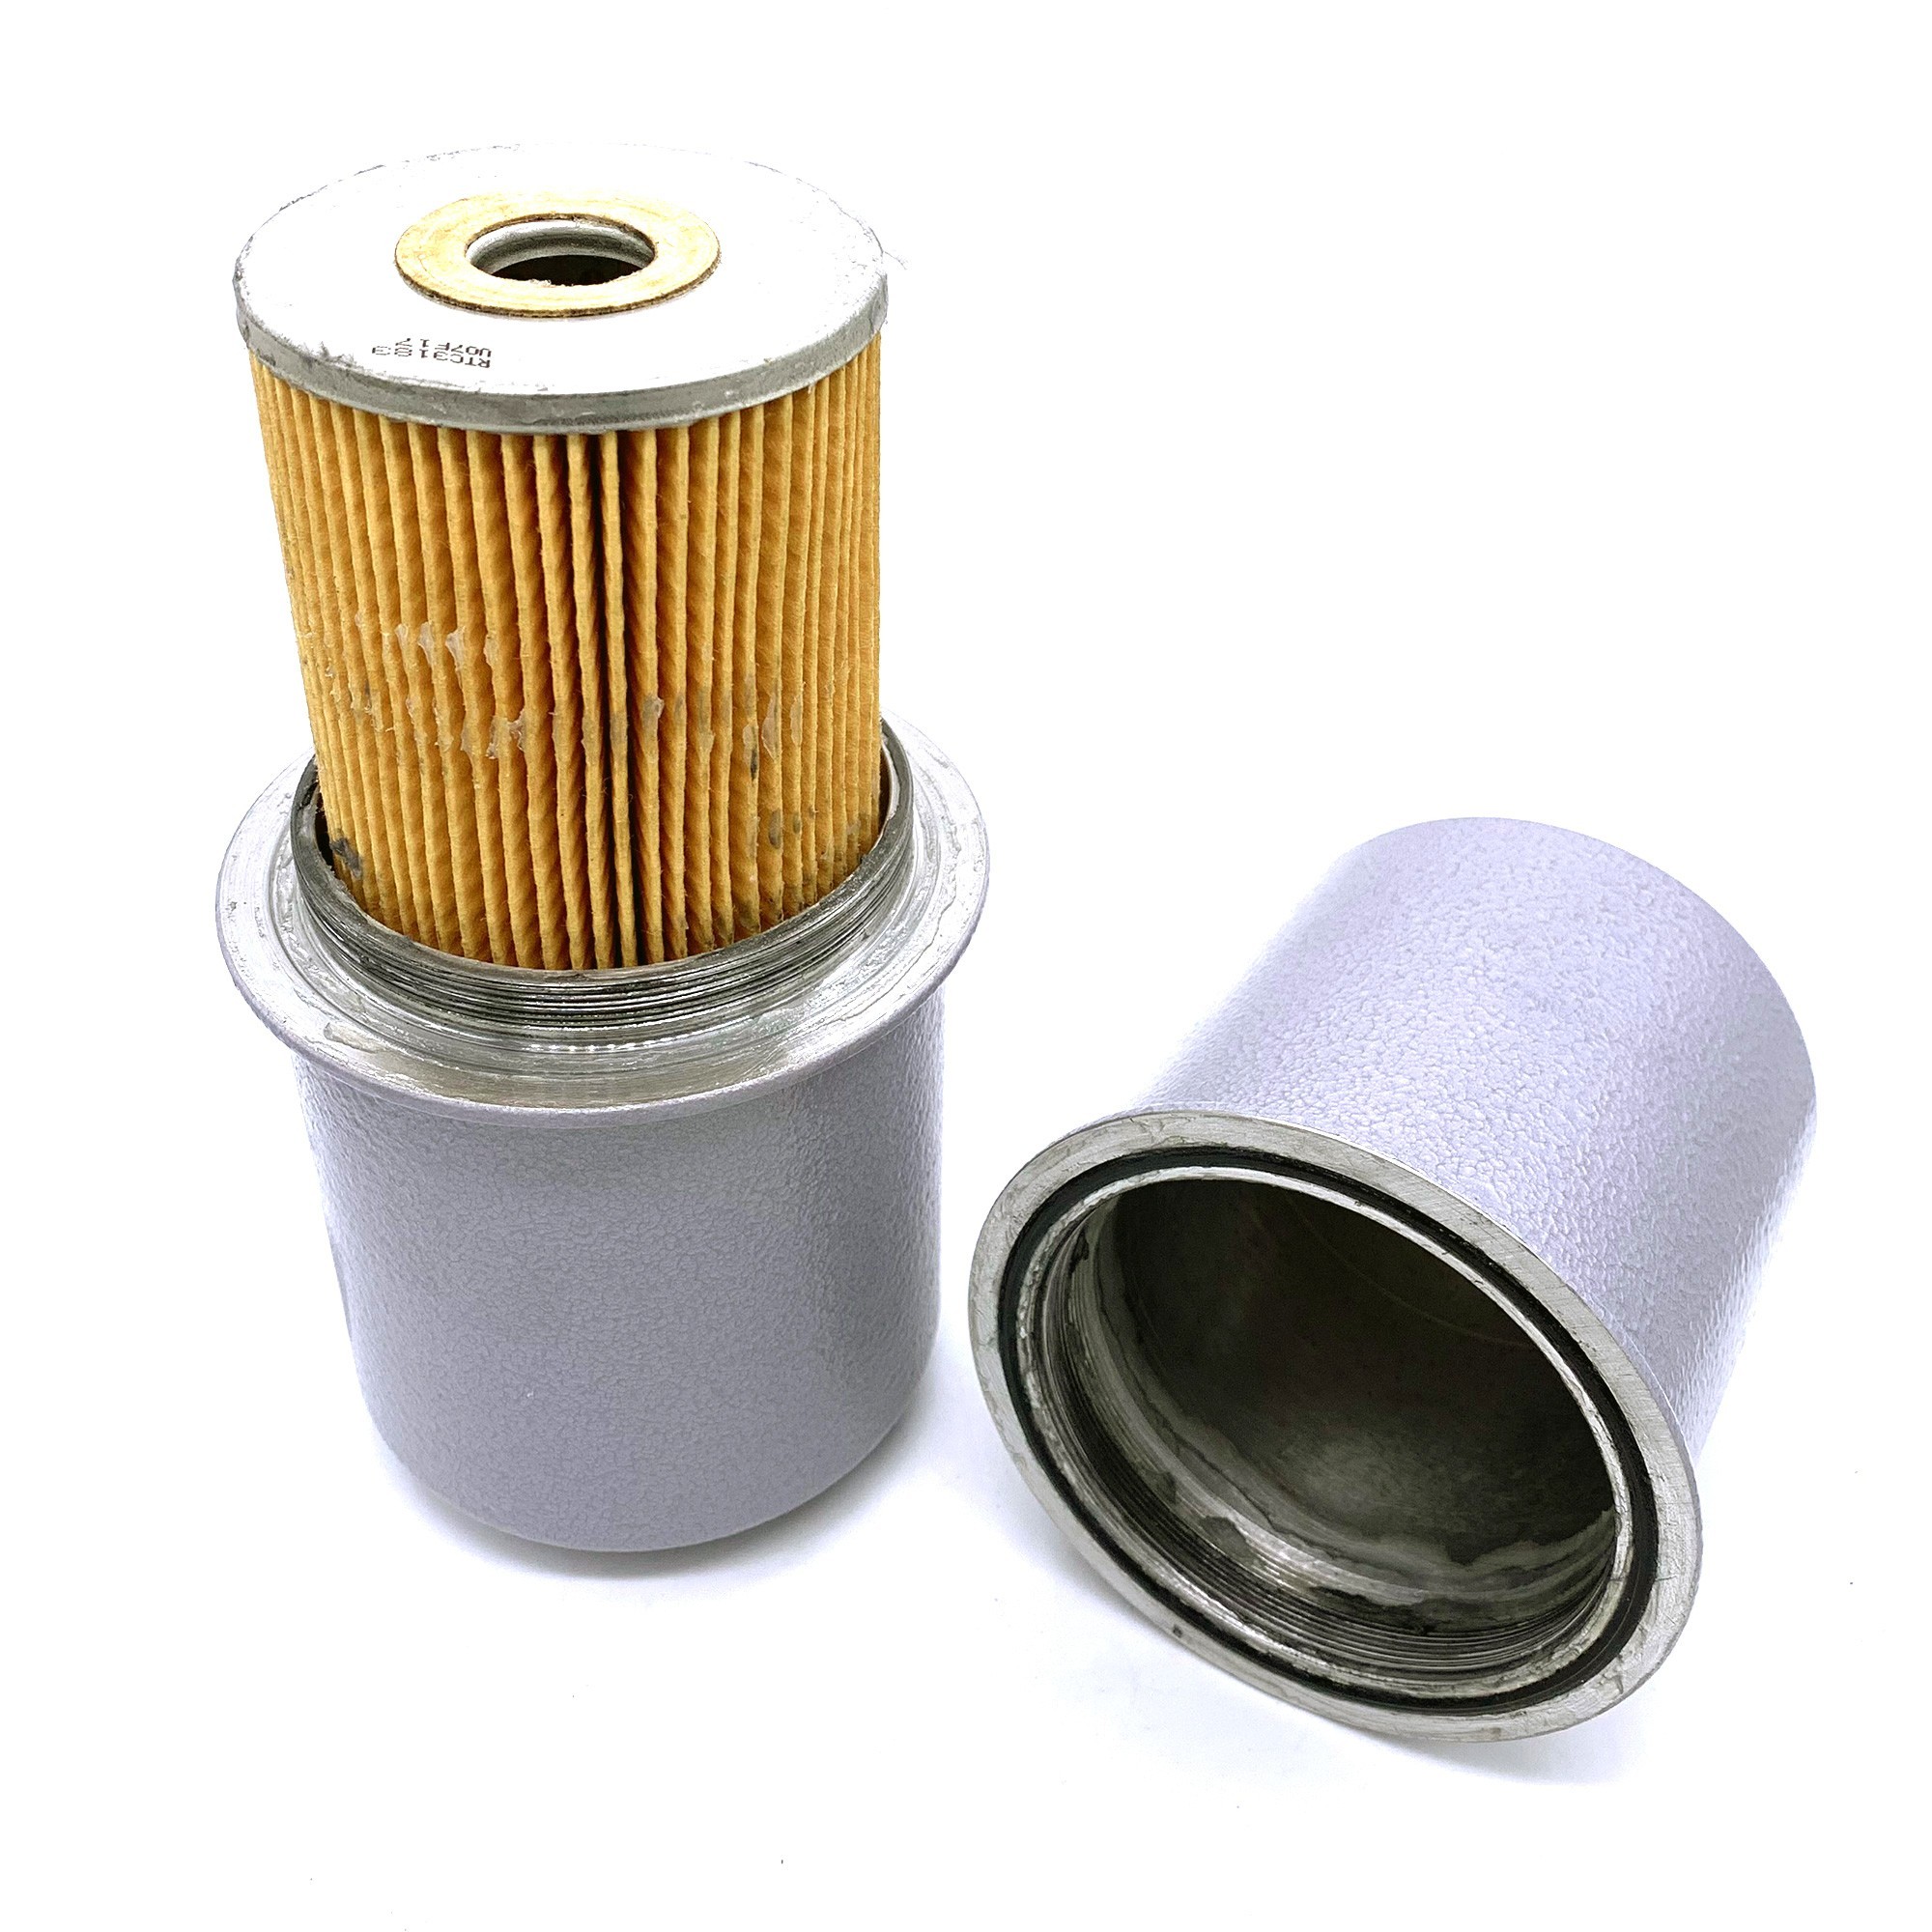 No Eta Oil Filter 1948-54 with Changeable Element